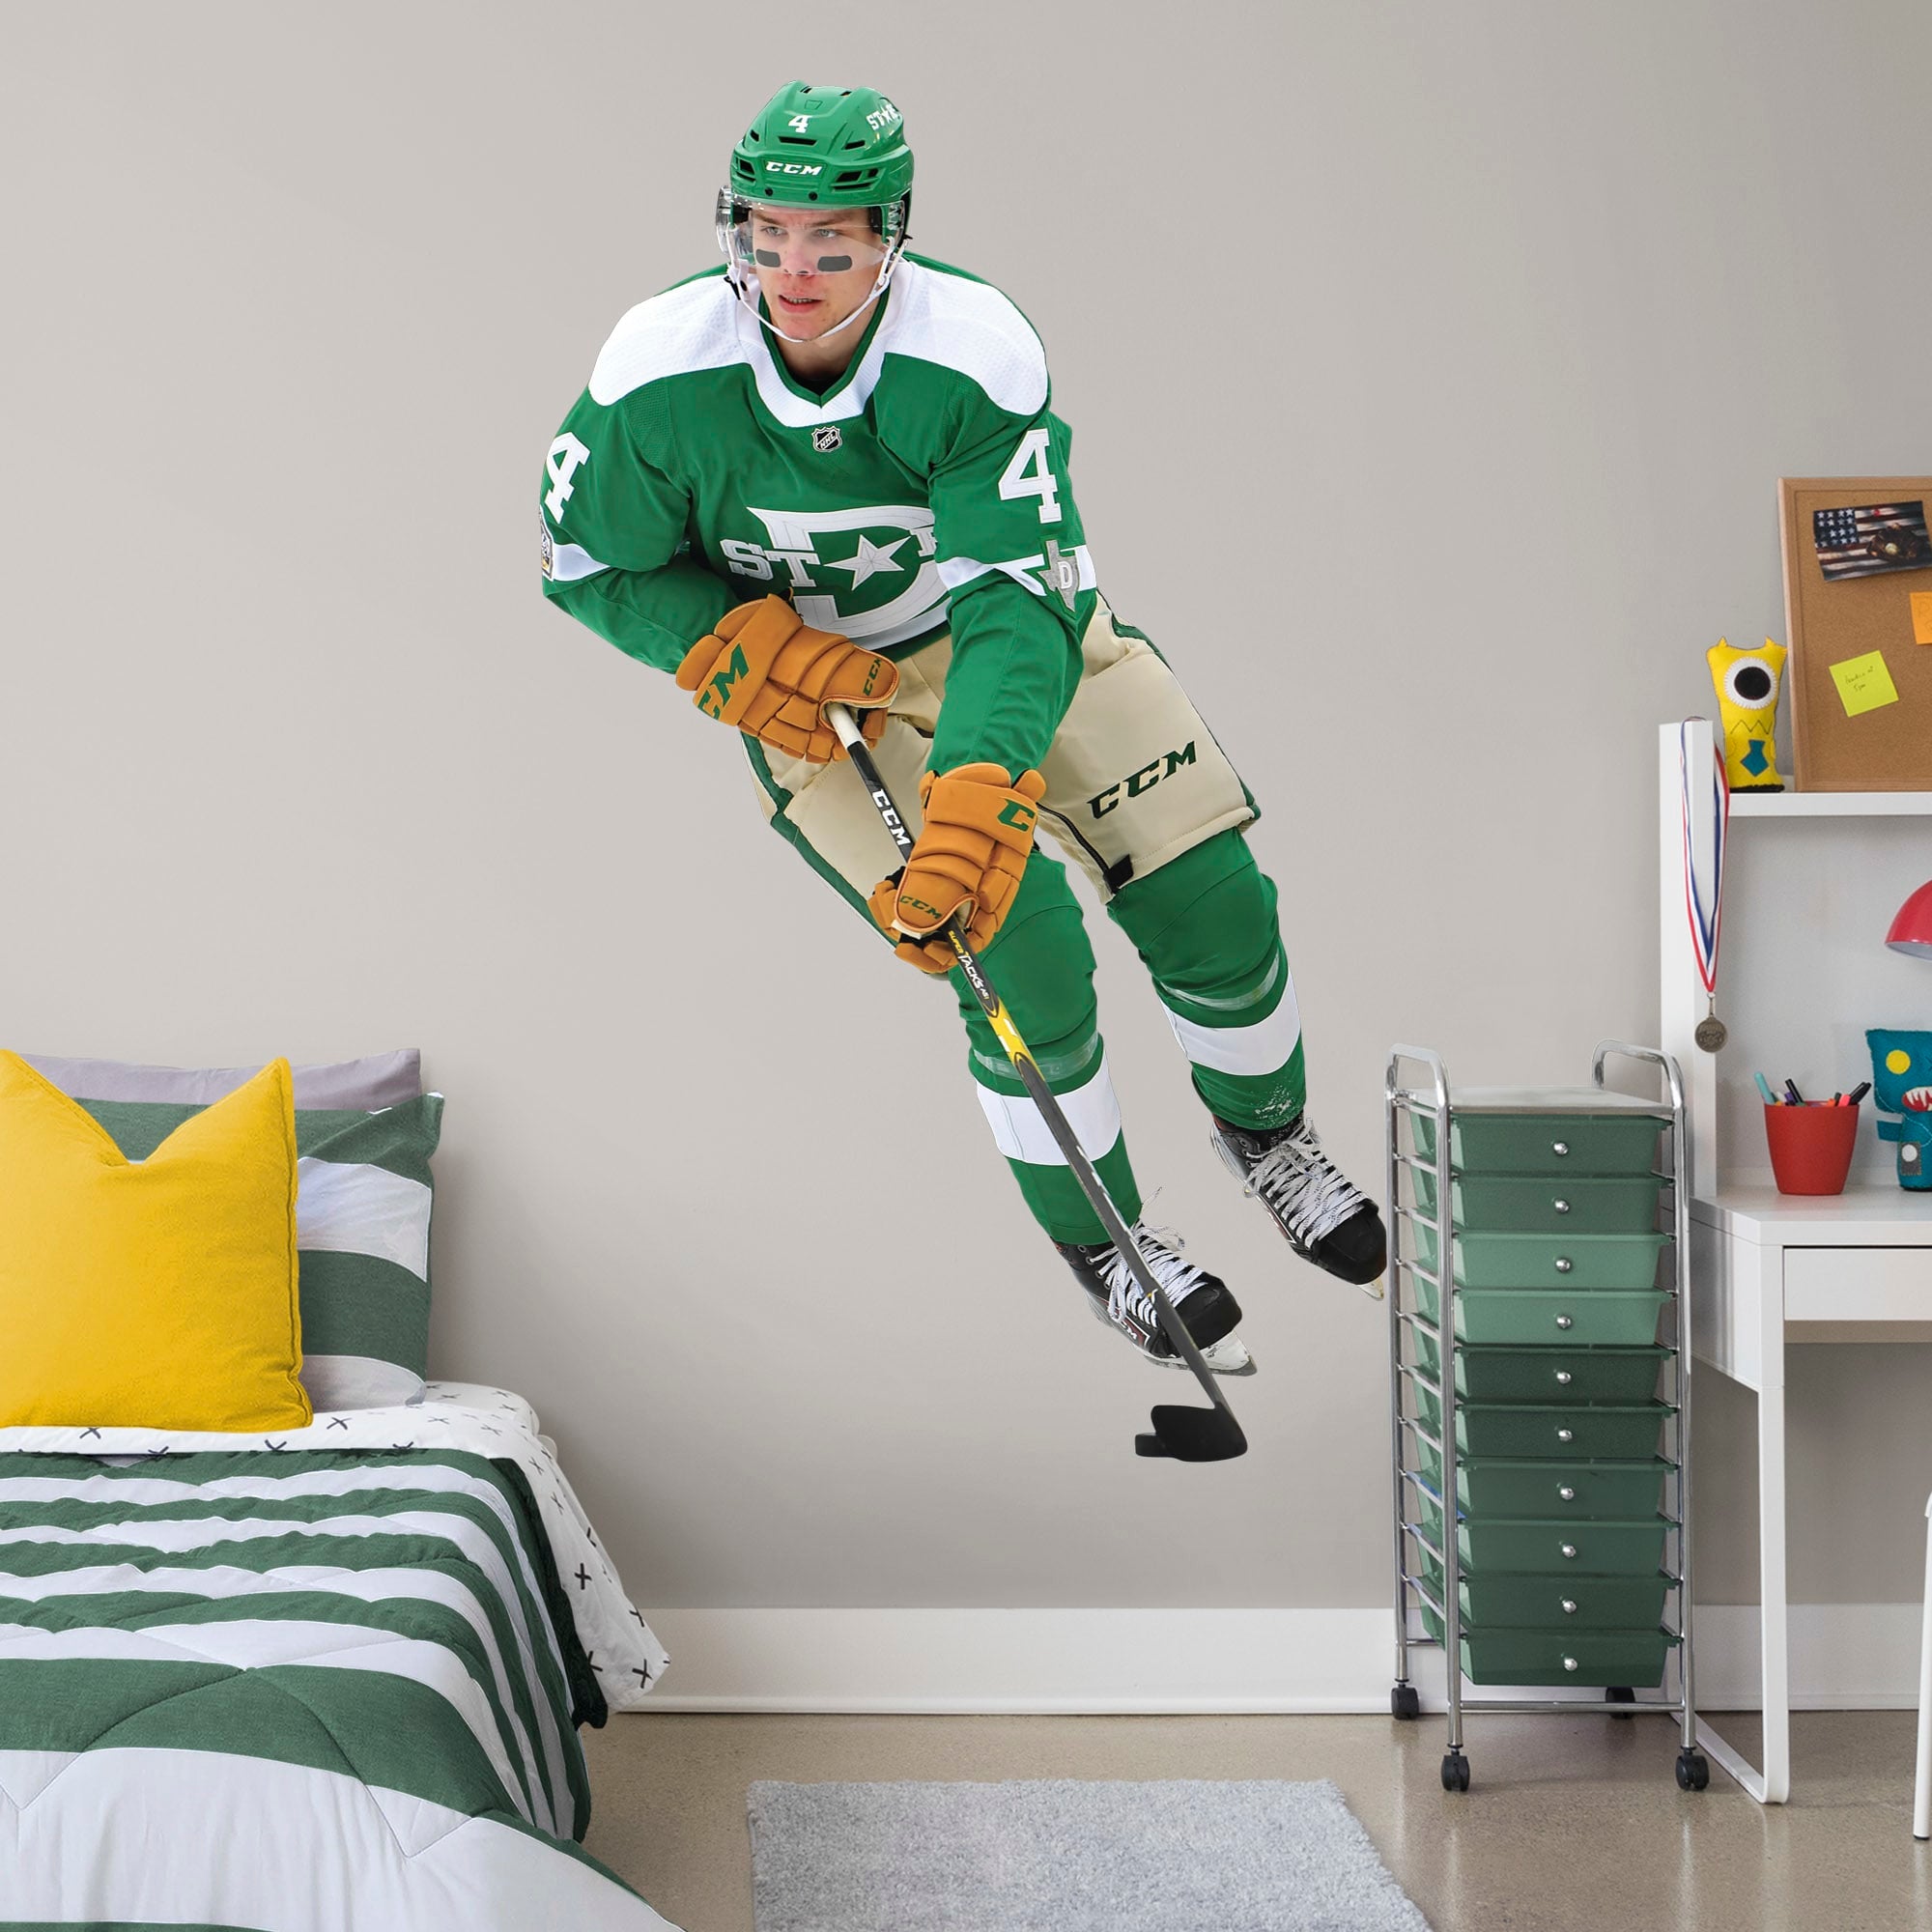 Miro Heiskanen for Dallas Stars - Officially Licensed NHL Removable Wall Decal Life-Size Athlete + 2 Decals (48"W x 78"H) by Fat